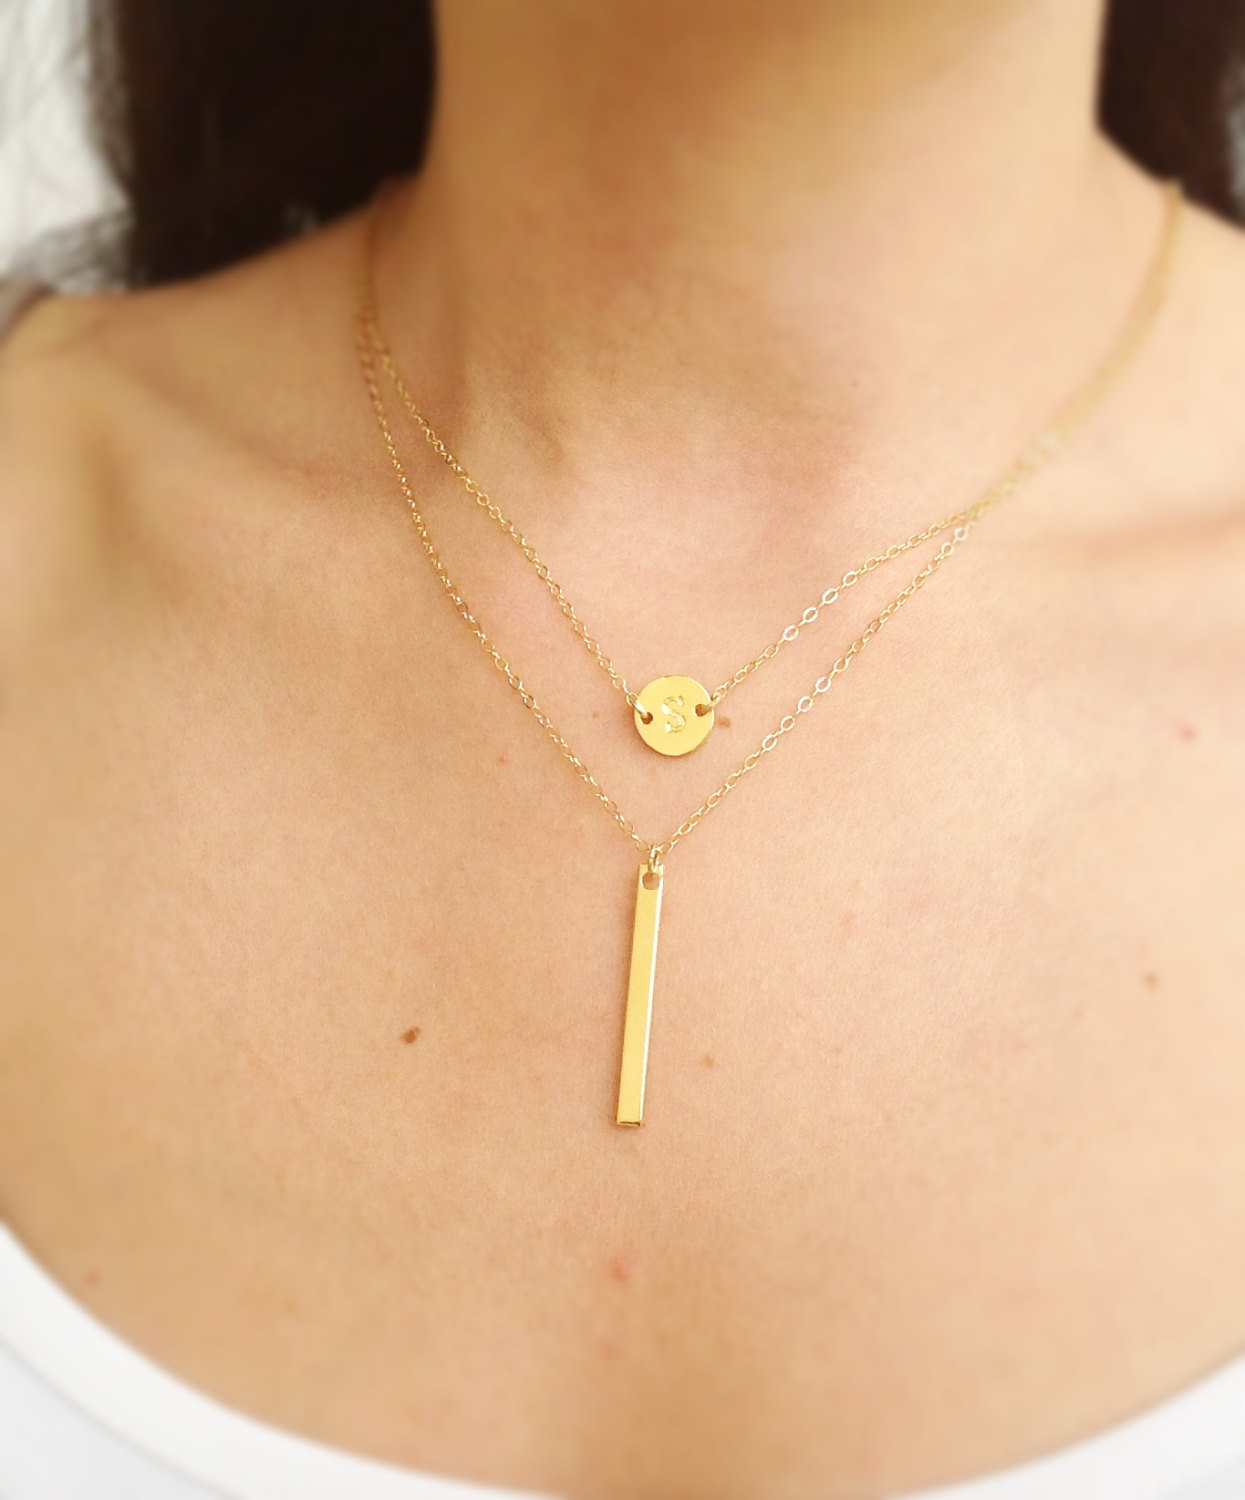 Initial necklace,gold necklace, set of two necklaces, bar necklace, gold filled necklace, personalized necklace -B027